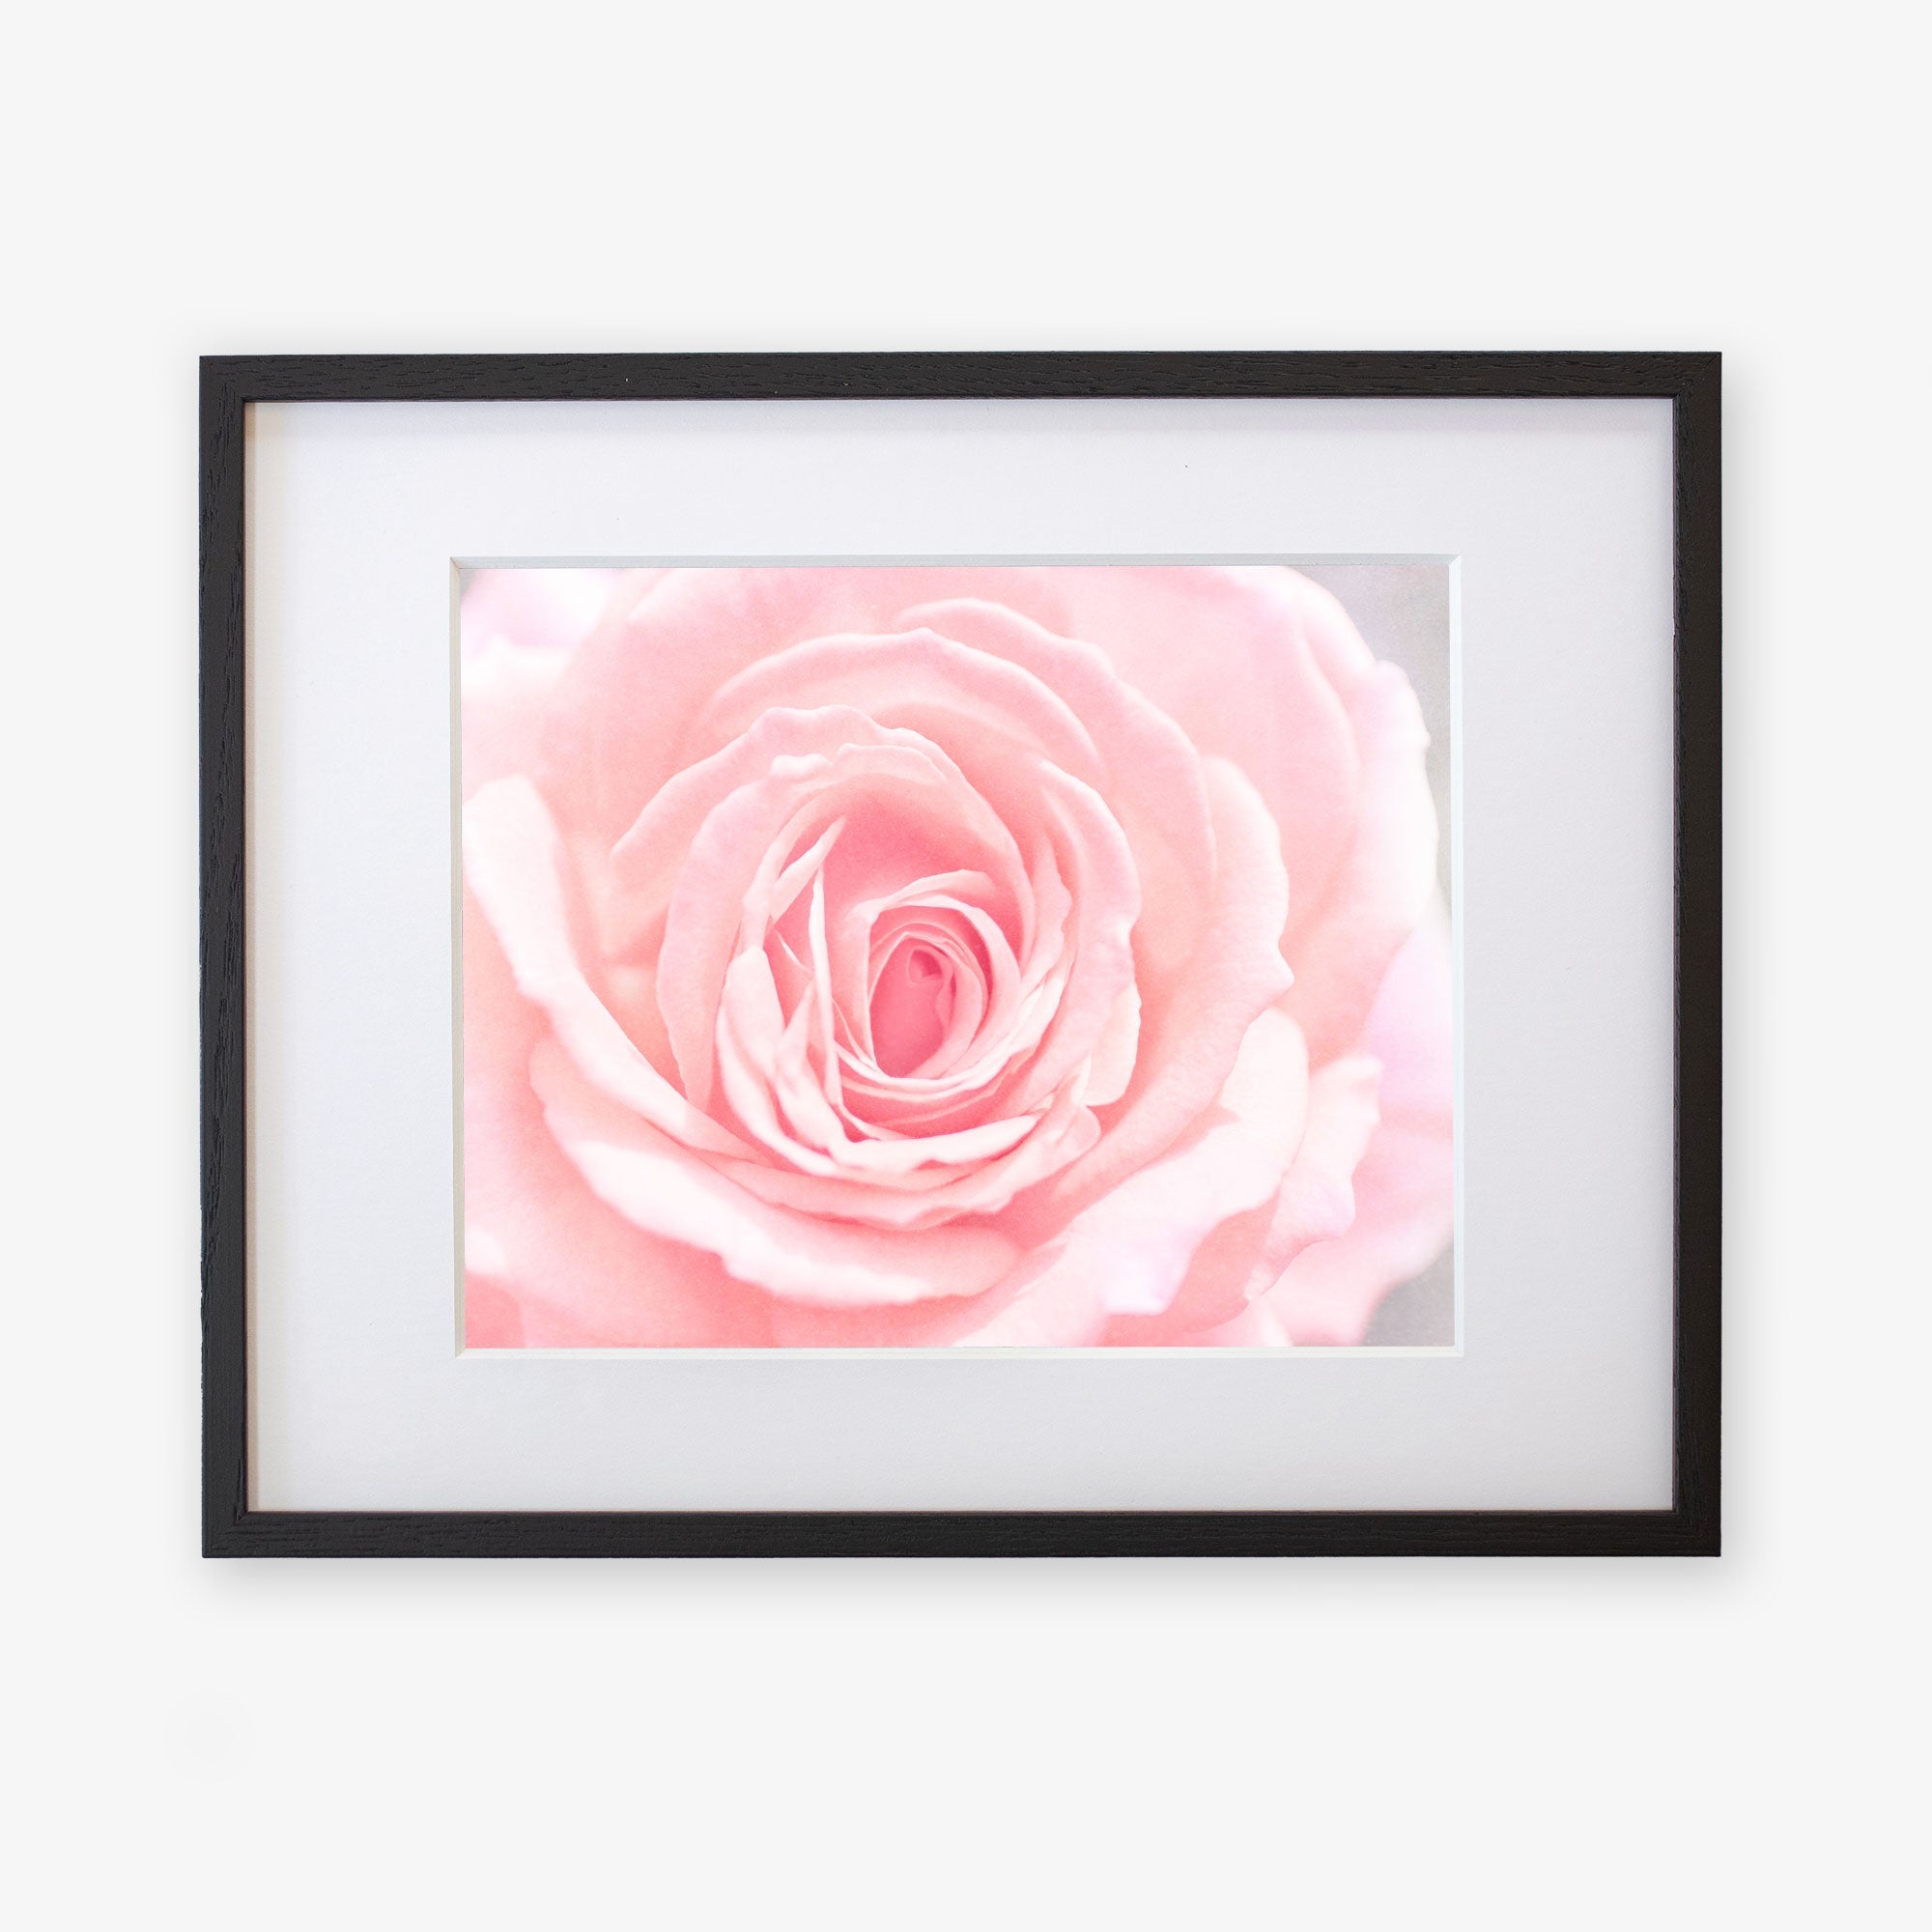 A framed Pink Rose Print of a close-up view of a soft pink rose in bloom, with delicate petals unfurling at the center, set against a white background by Offley Green.